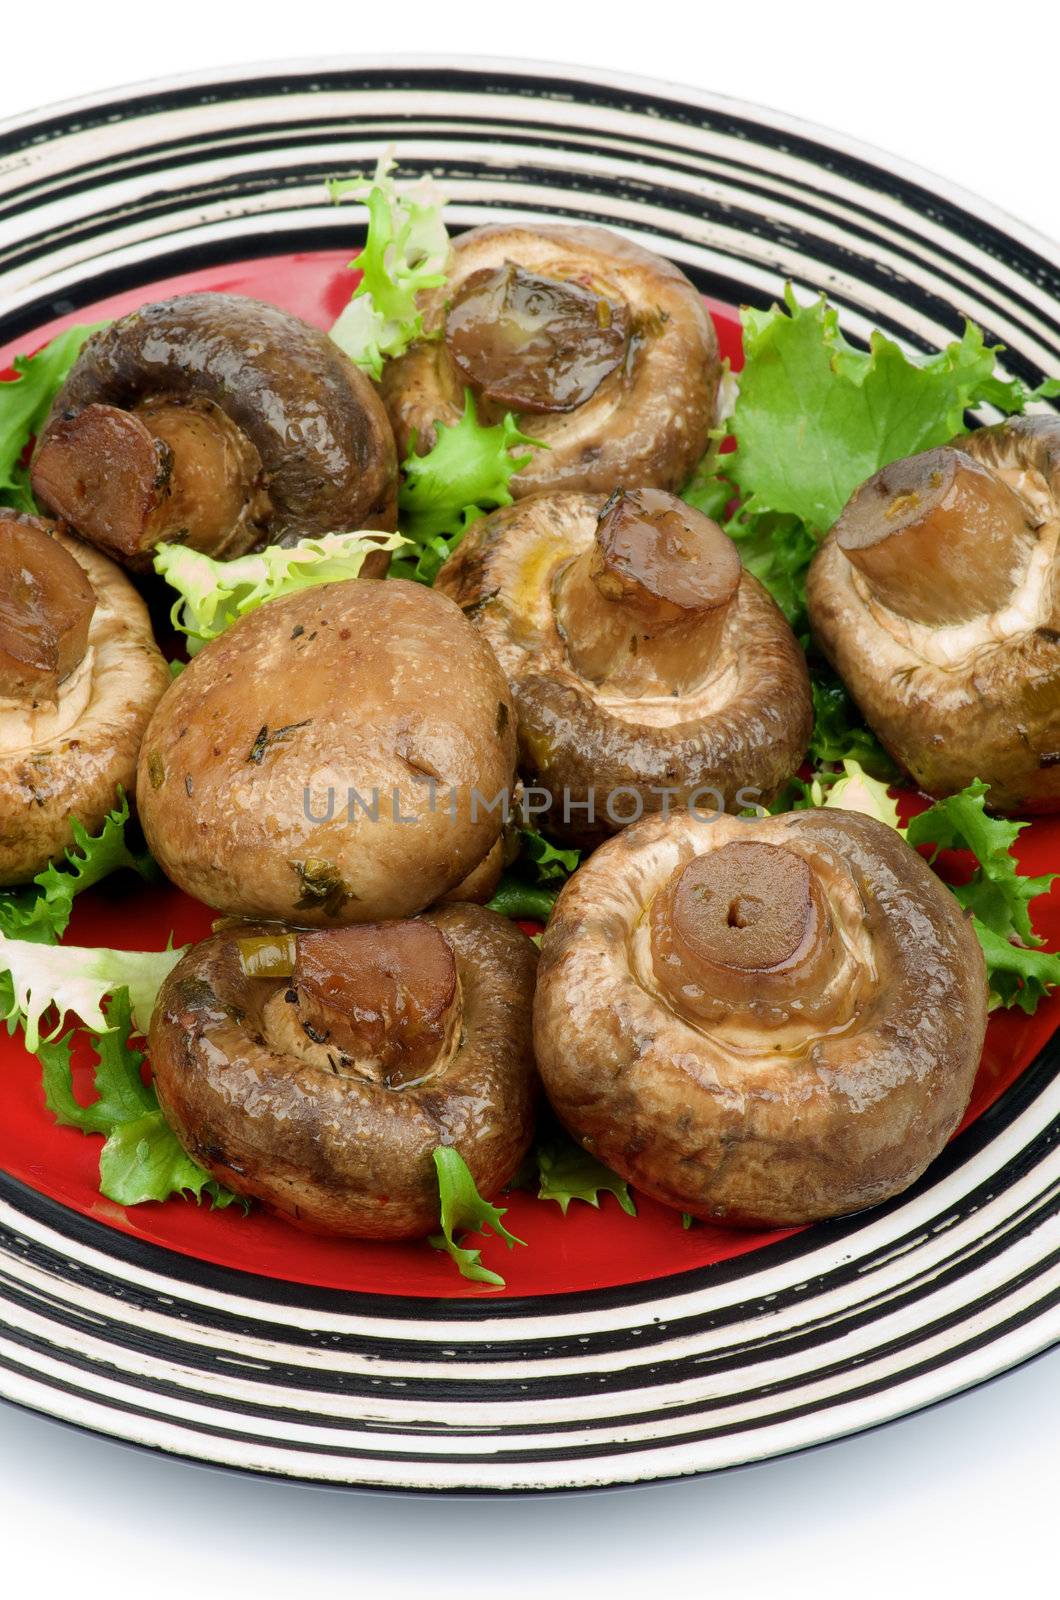 Roasted Big Mushrooms Champignon with Greens on Red Plate cross section isolated on white background